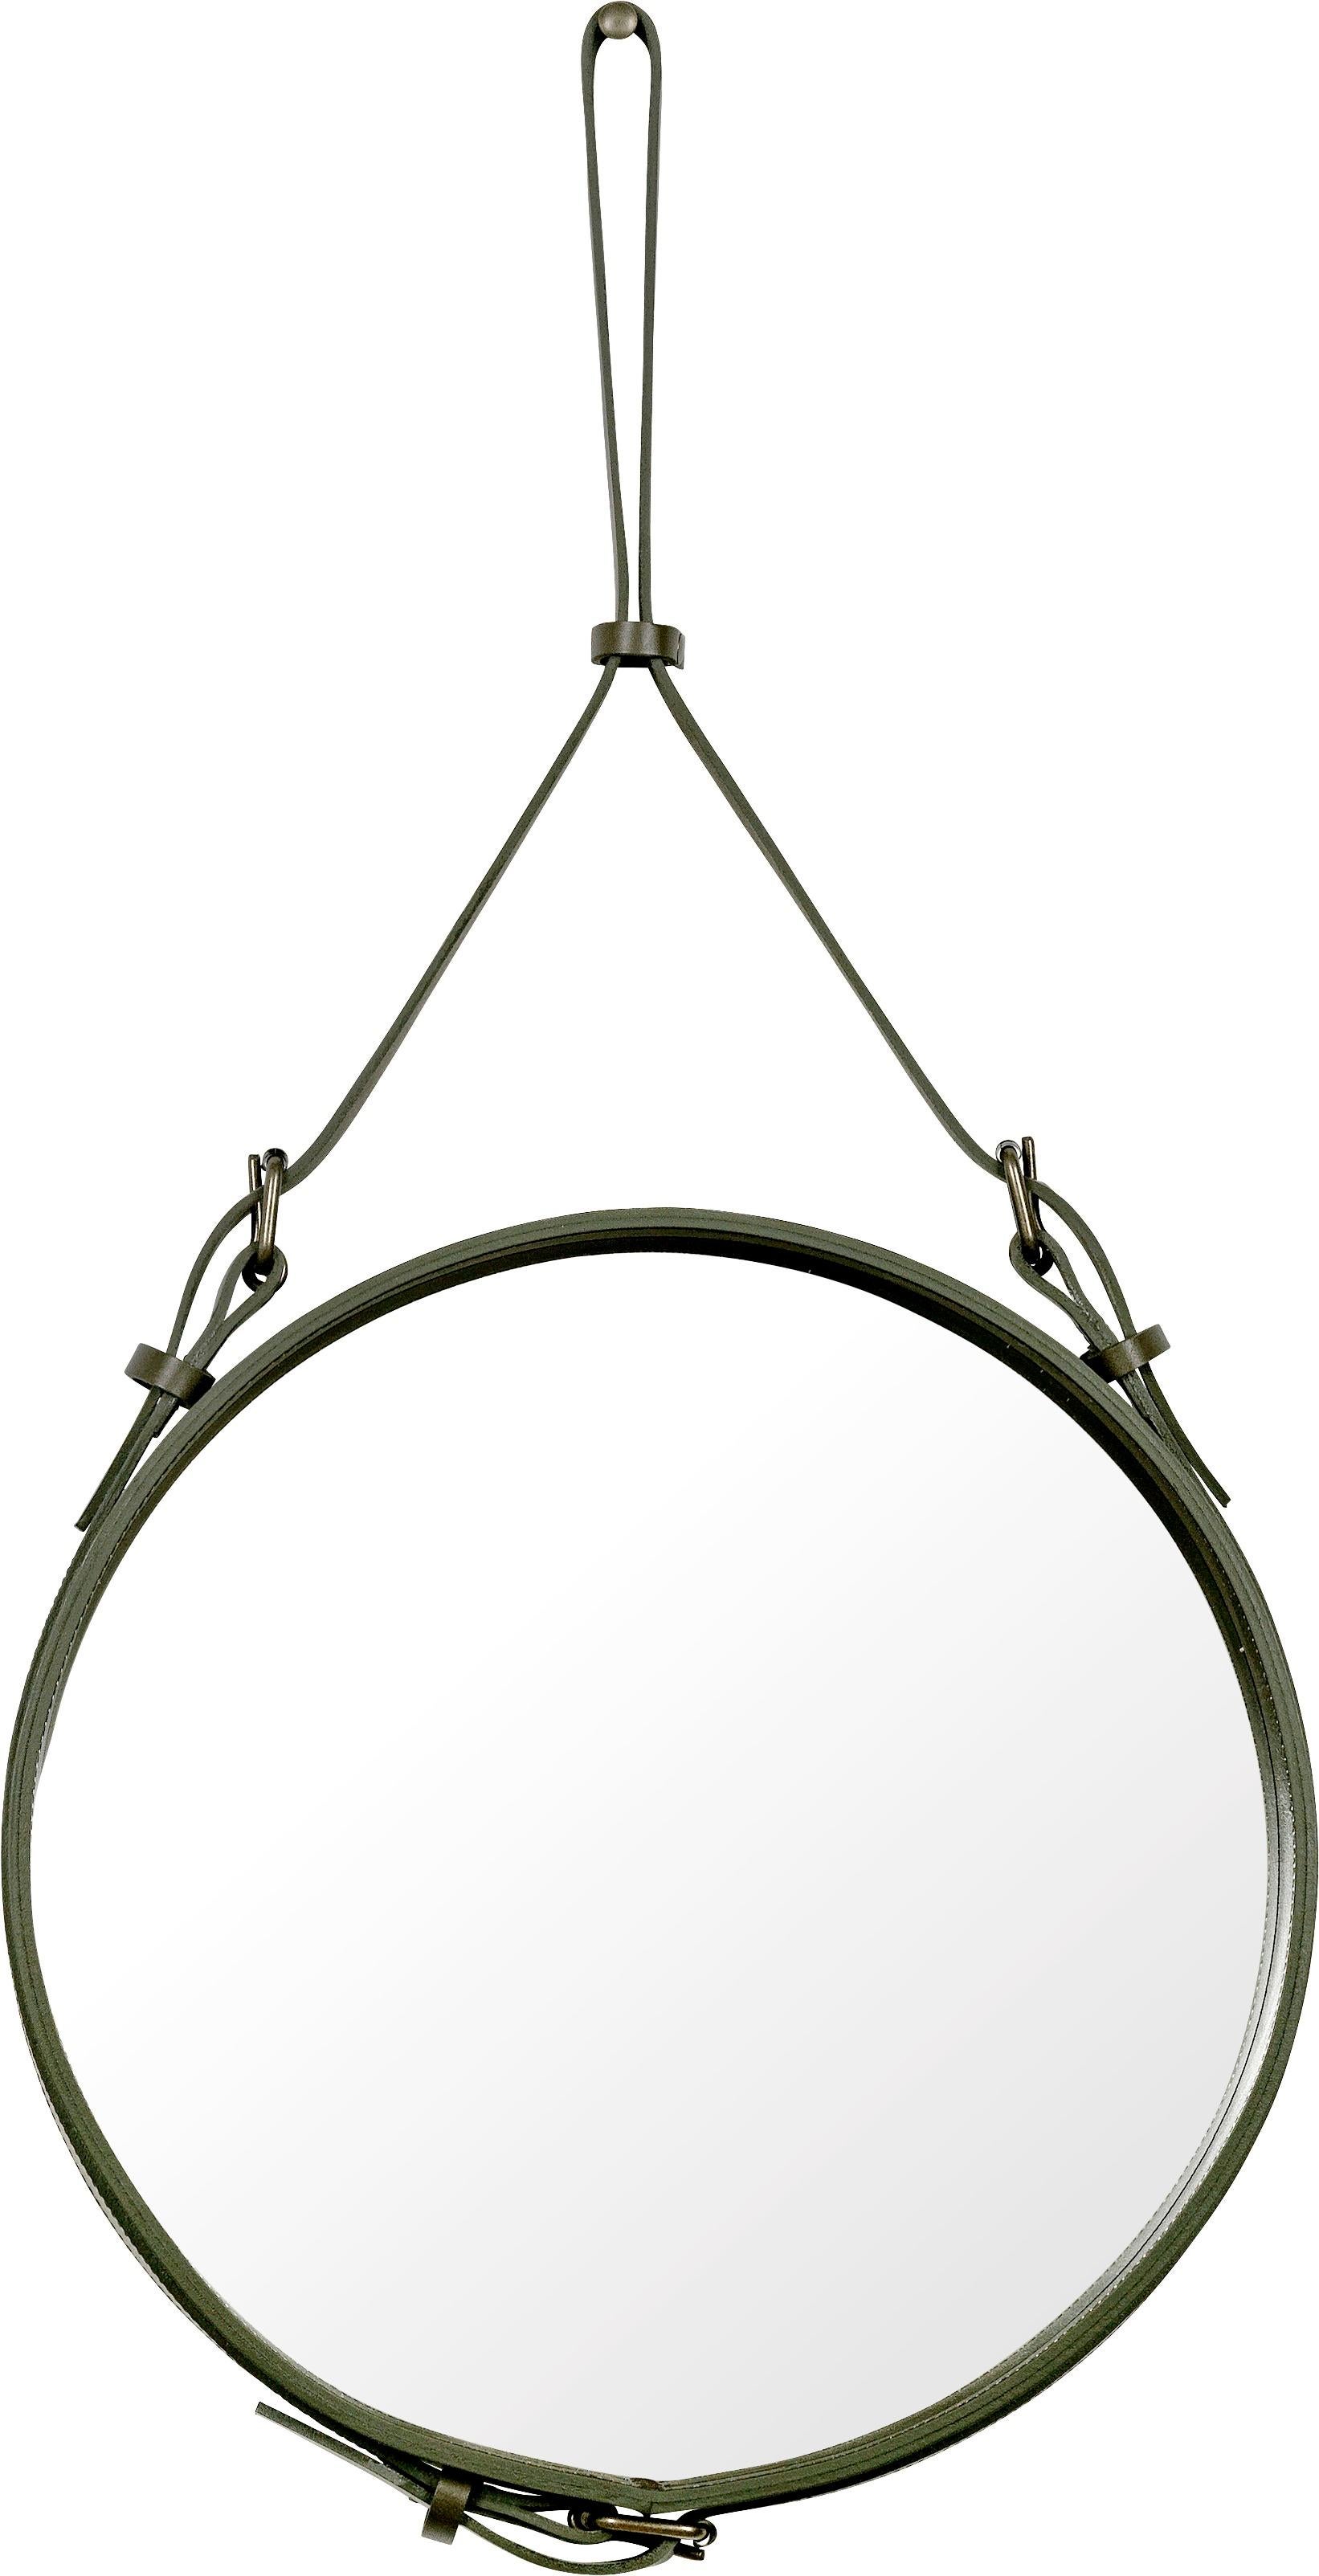 Contemporary Jacques Adnet Small Circulaire Mirror with Brown Leather For Sale